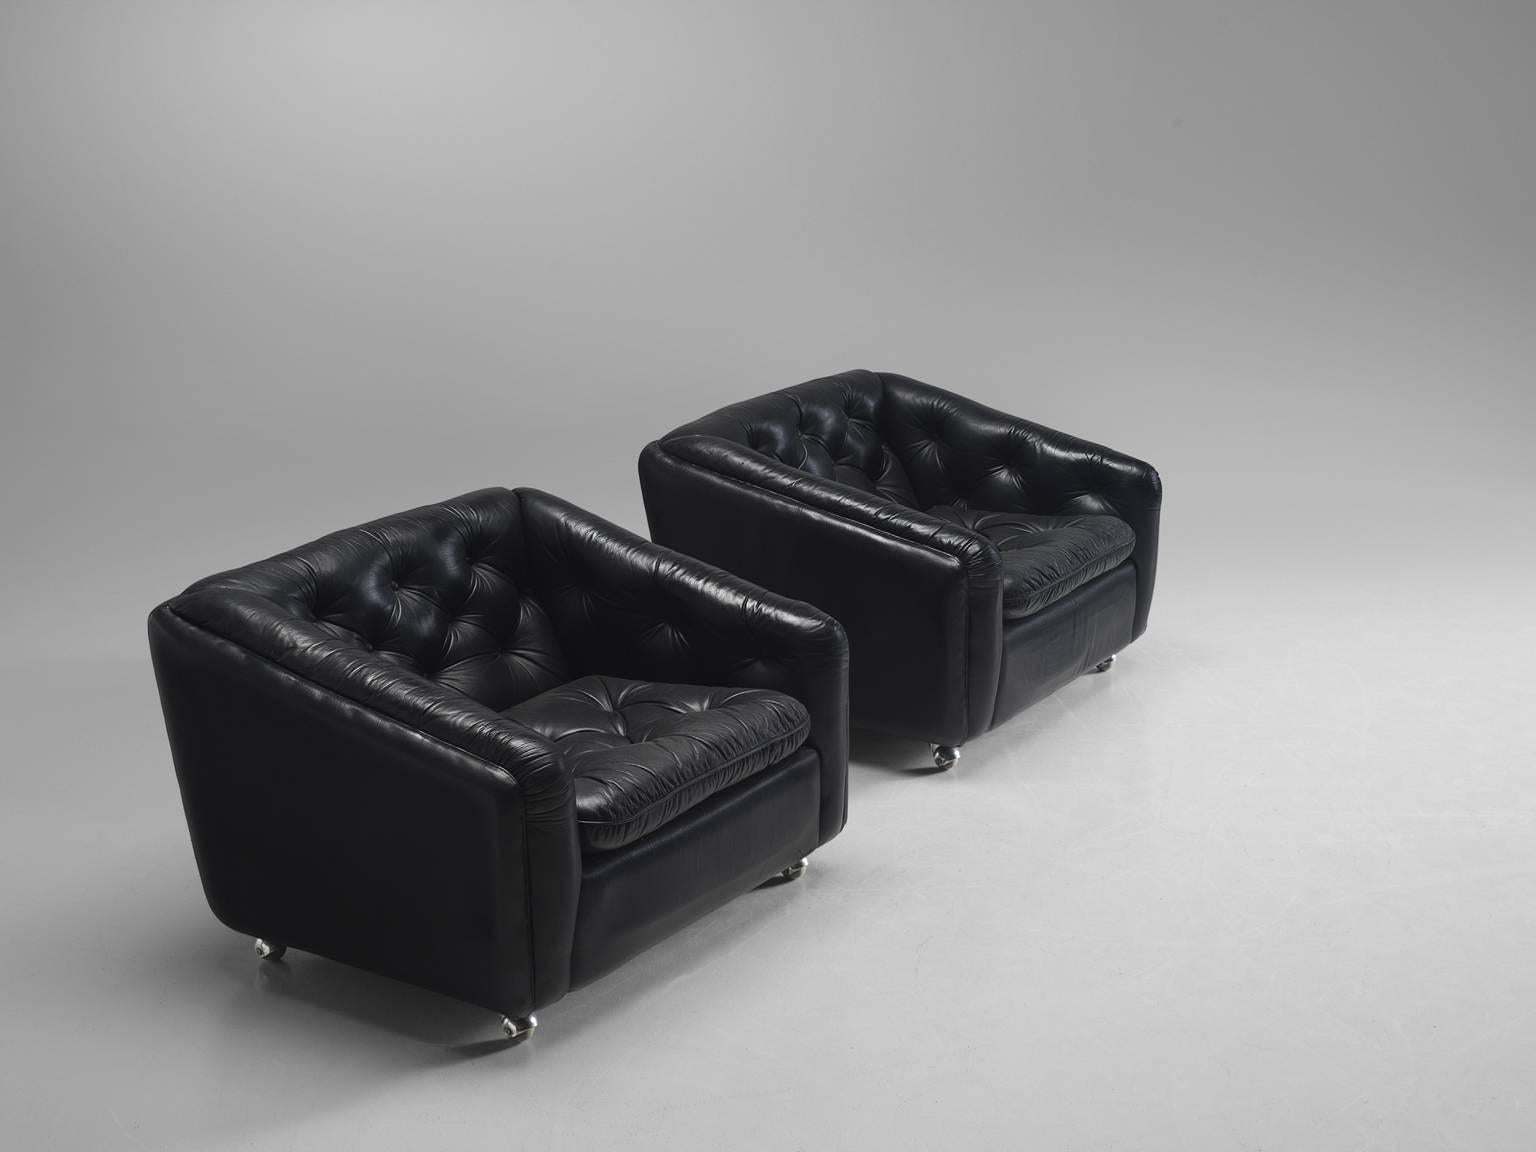 Lounge chairs C610 in black leather and steel by Geoffrey Harcourt for Artifort, the Netherlands, 1960s. 

These tufted comfortable chairs feature functional steel wheels. The combination of steel and the black faux leather upholstery gives this set